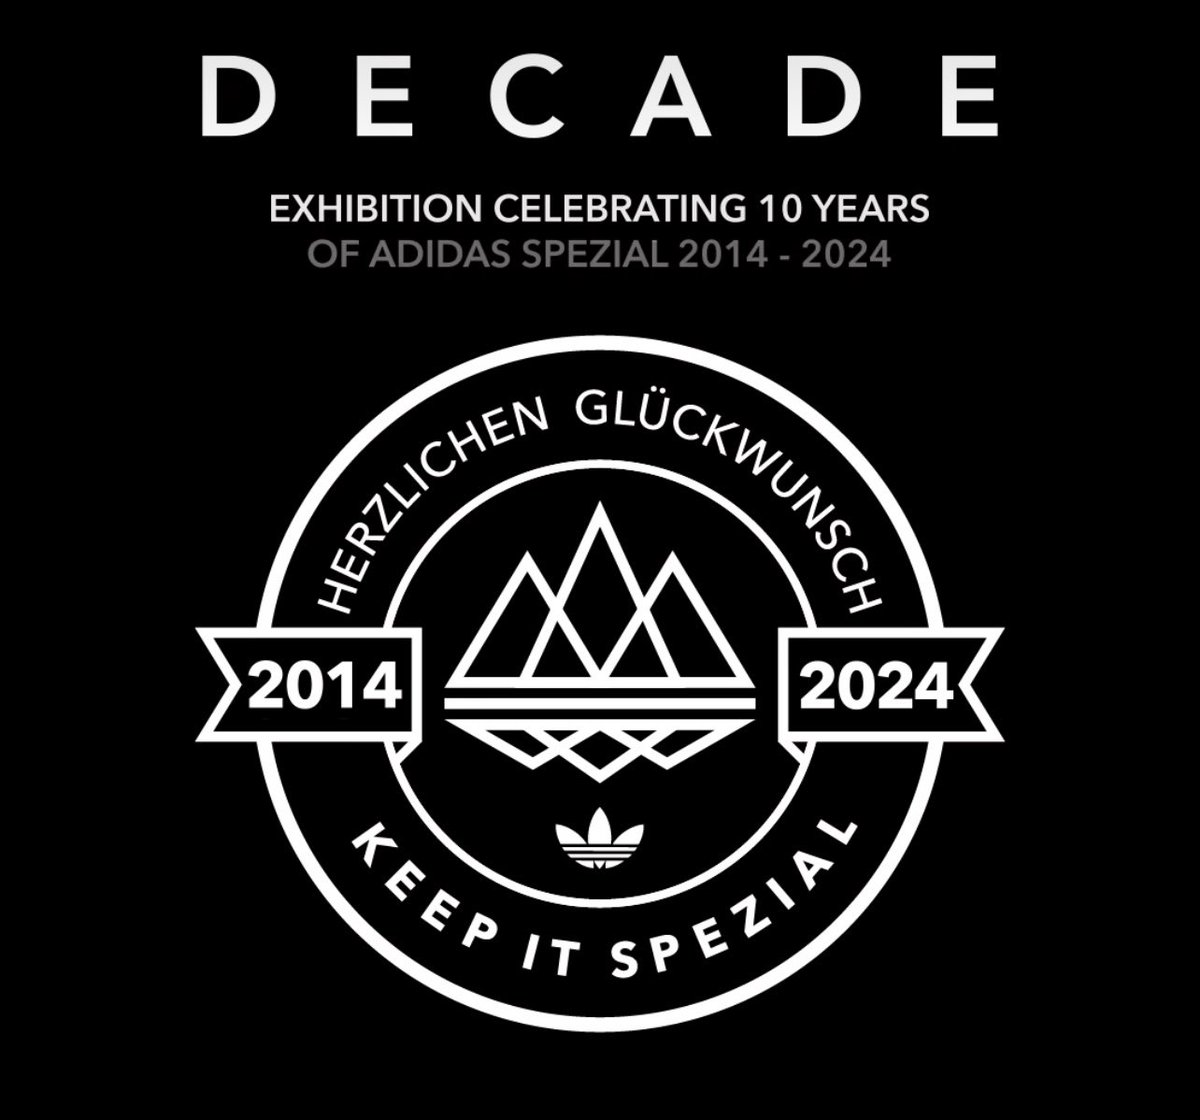 💥 TONIGHT 💥 BLACK GRAPE intimate performance at Level One Darwen - on stage at 9pm 🍇 An event celebrating a decade of Adidas Spezial 2014-2024 👟👟👟 Tickets cost £15 proceeds to @nightsafebwd #BlackGrape #ShaunRyder #KermitLeveridge #adidasspzl #Darwen #Livemusic